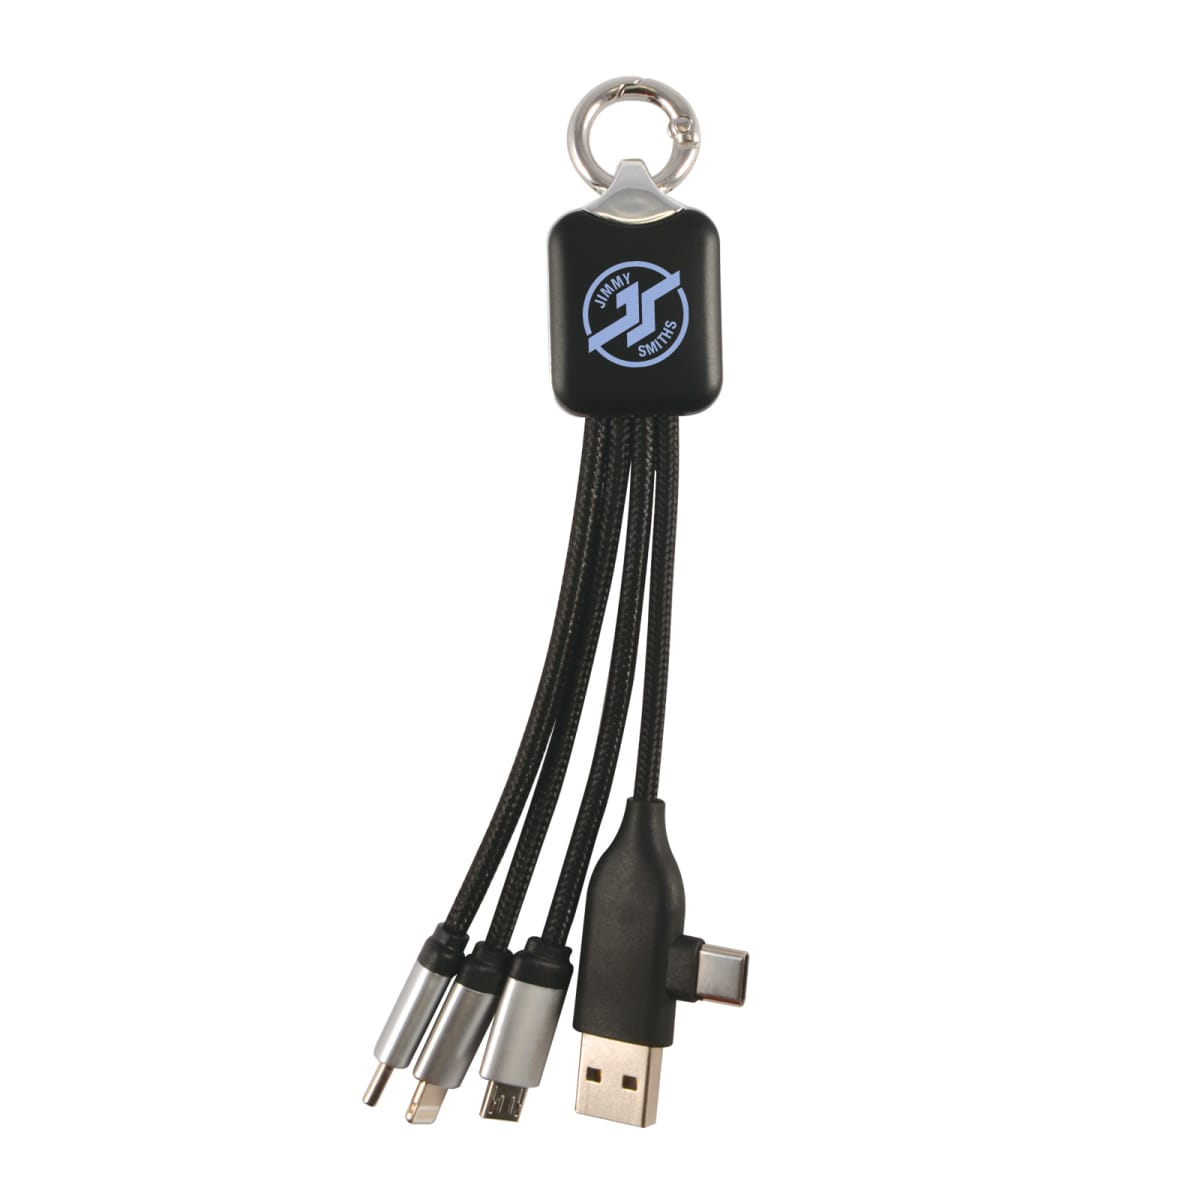 Kinetic Square Glow Cable